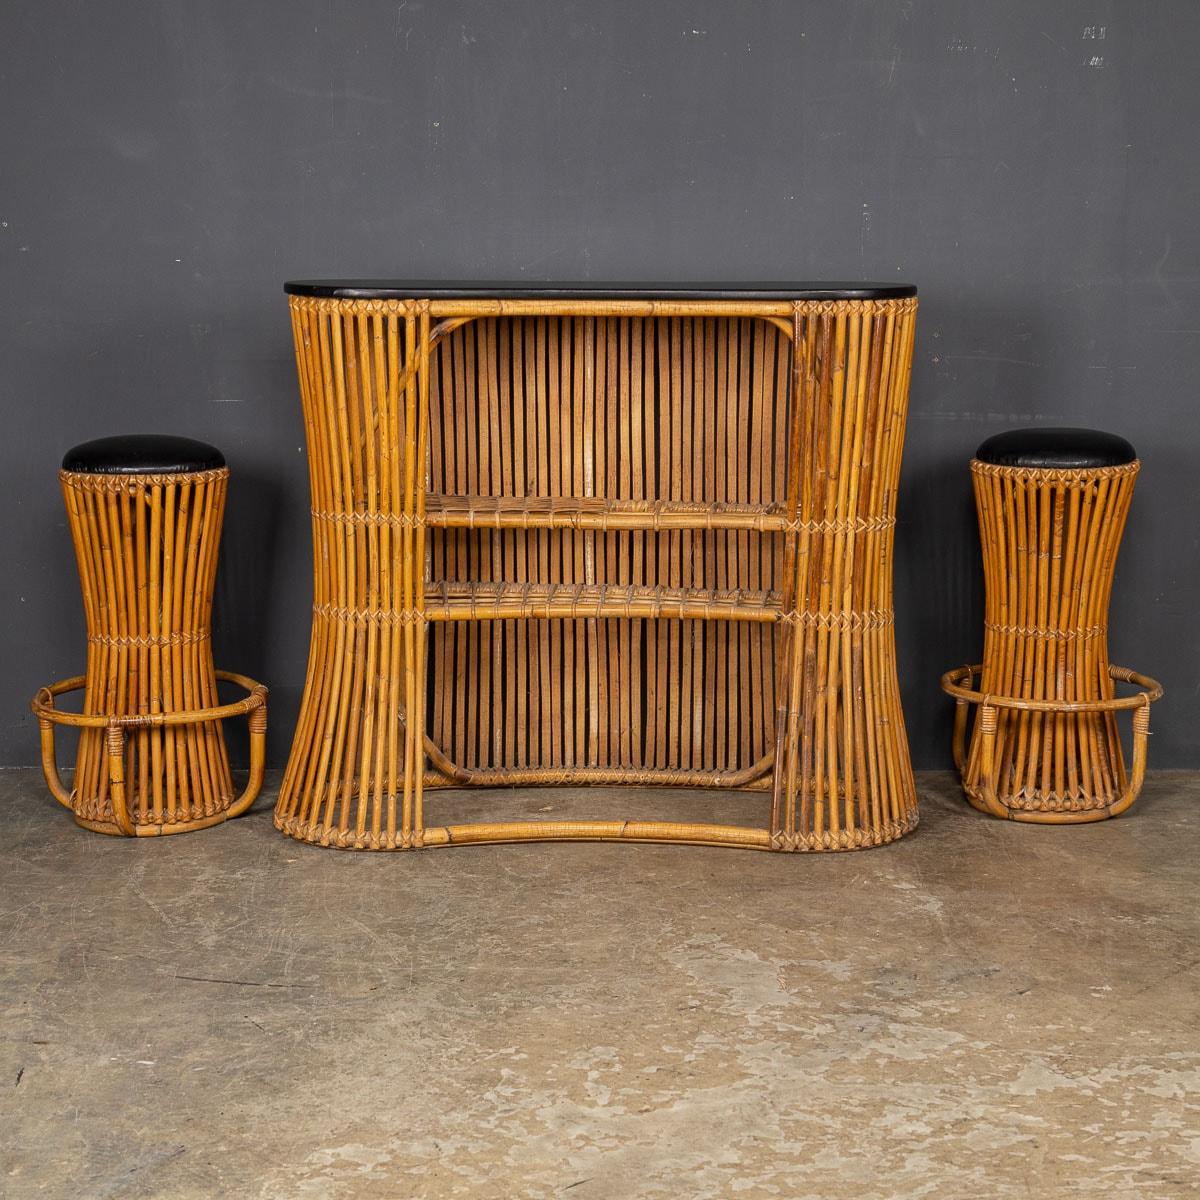 20th Century Italian Standing Bamboo Dry Bar & Stools, c.1960 For Sale 2